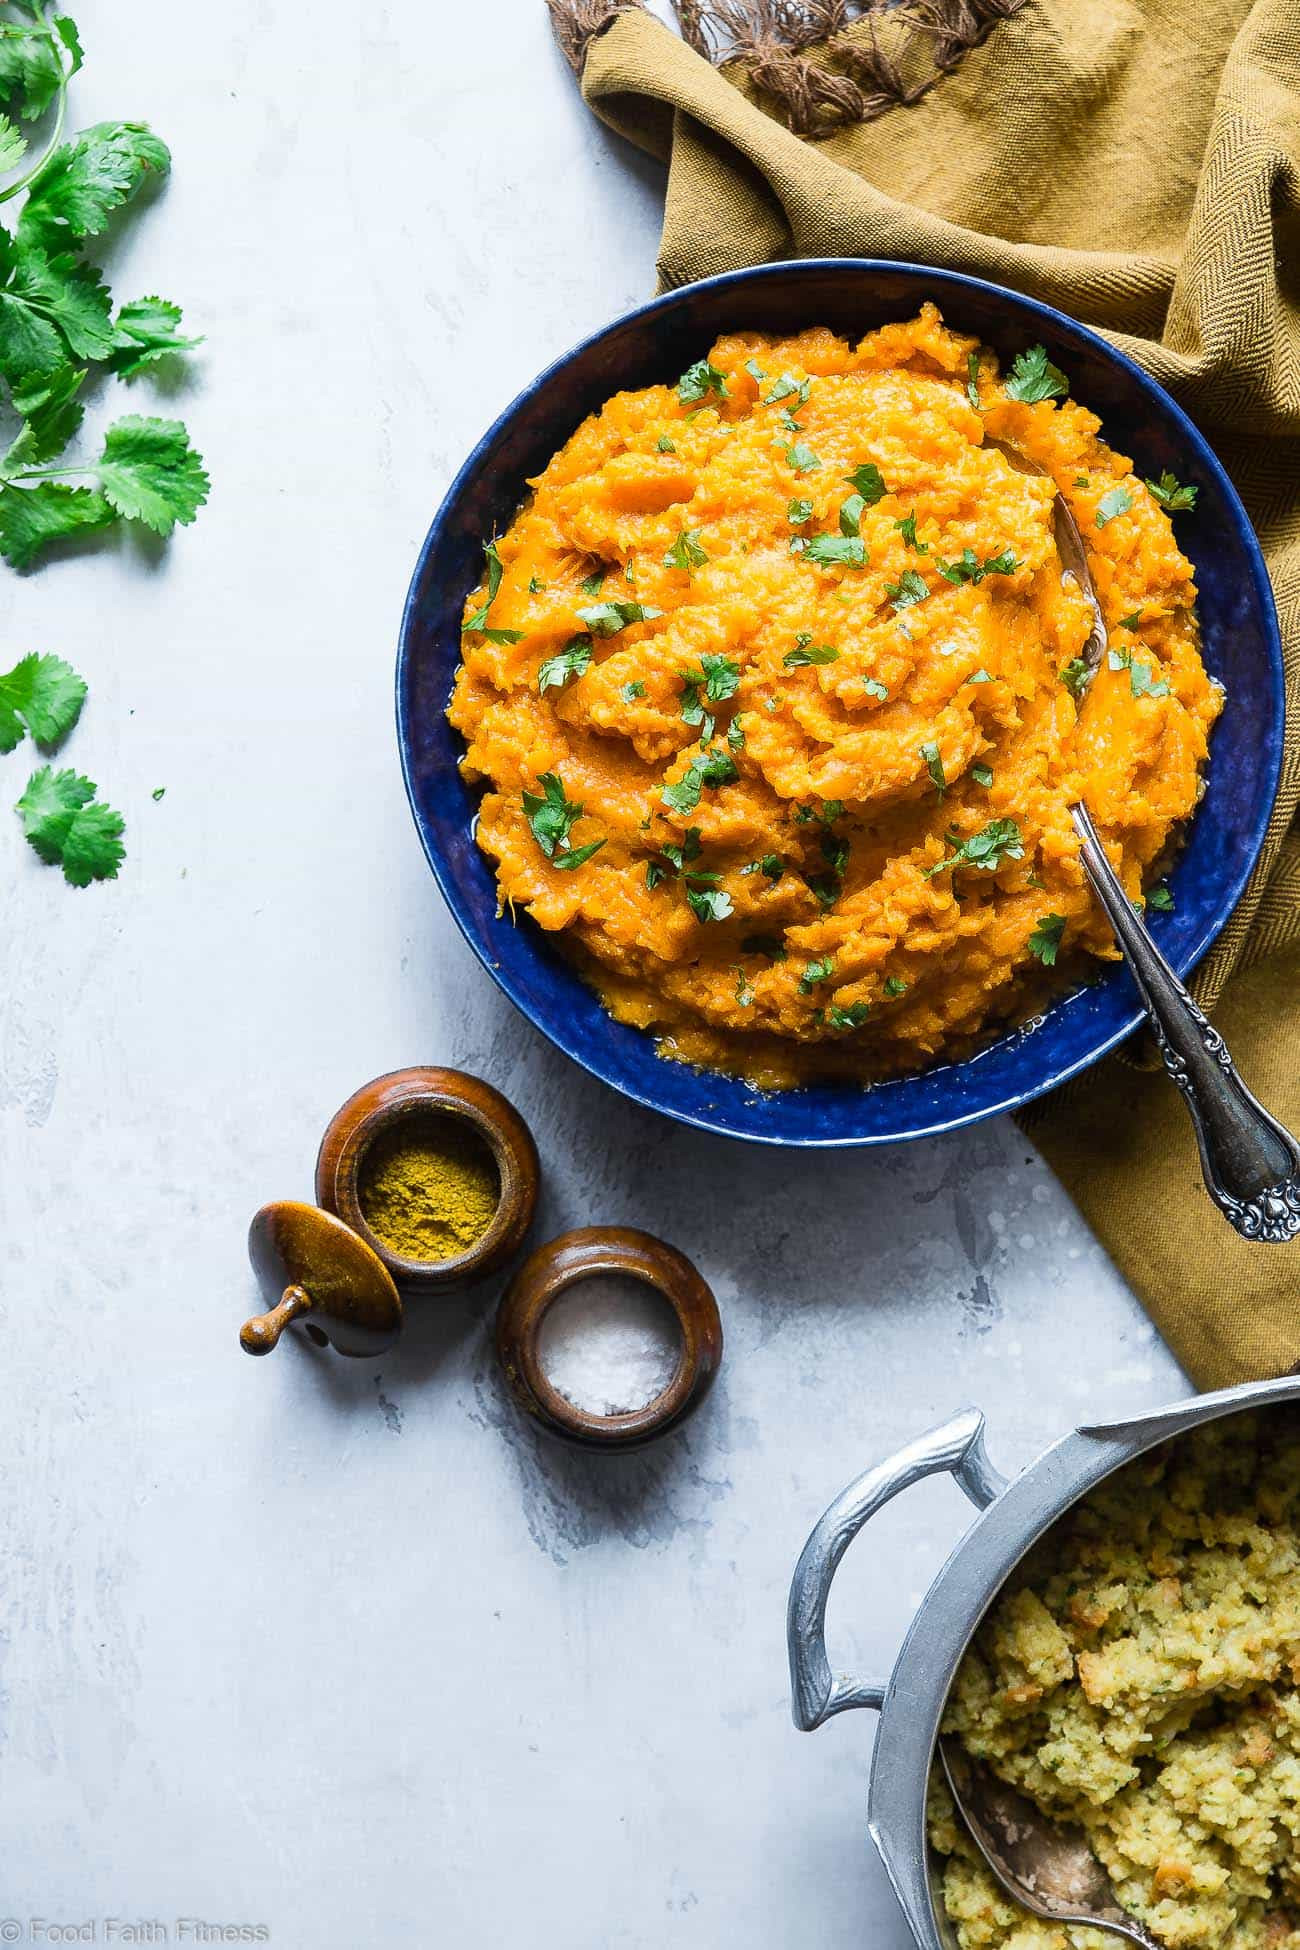 Dairy Free Mashed Sweet Potatoes
 Curried Savory Vegan Healthy Mashed Sweet Potatoes